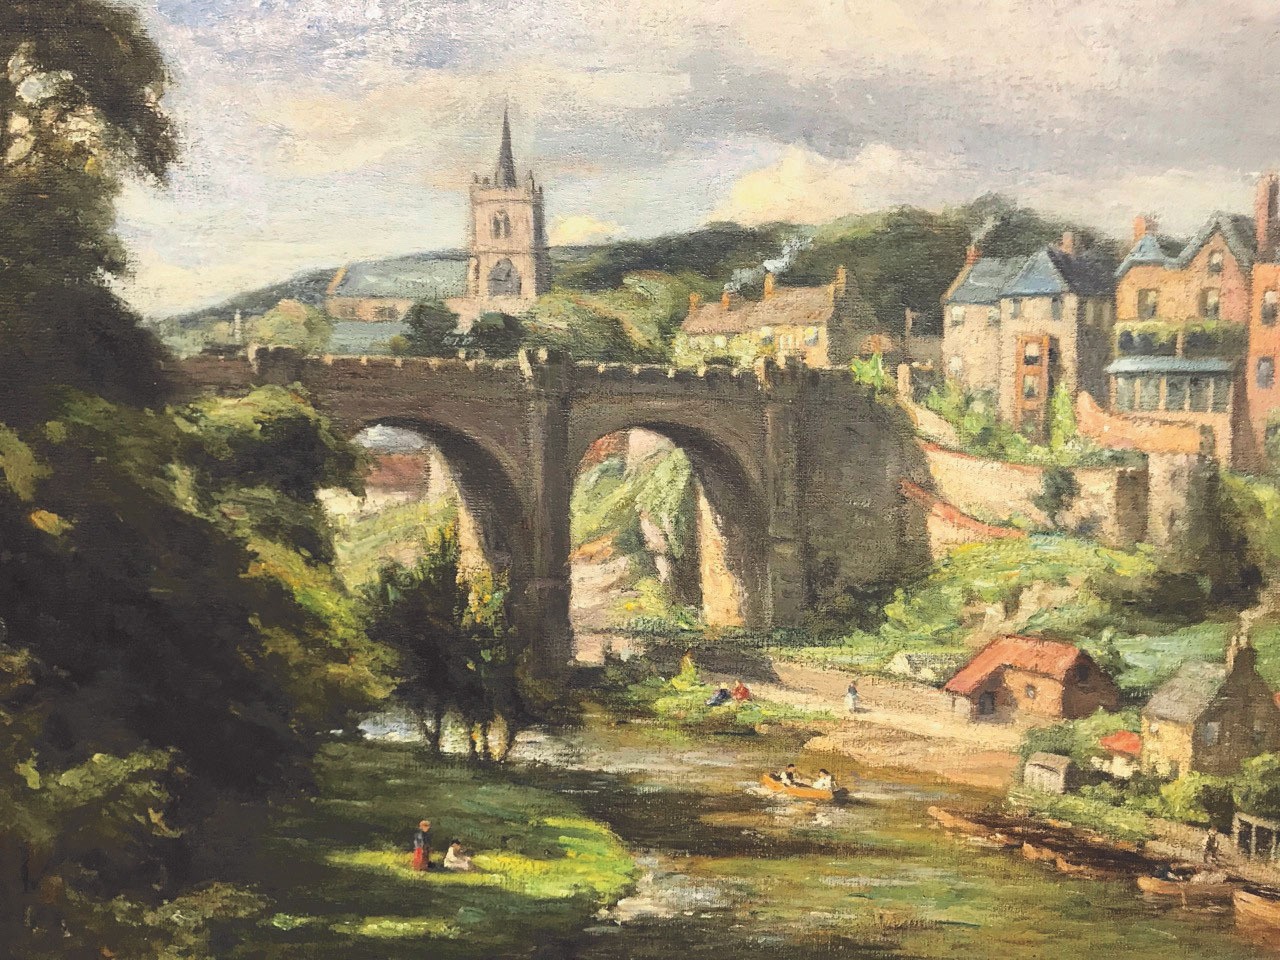 William Greaves (1852-1938), Knaresborough, oil on canvas, £5,500. NB He was born in Leeds, studied at Sheffield College of Art & mostly painted oils of the Yorkshire area.